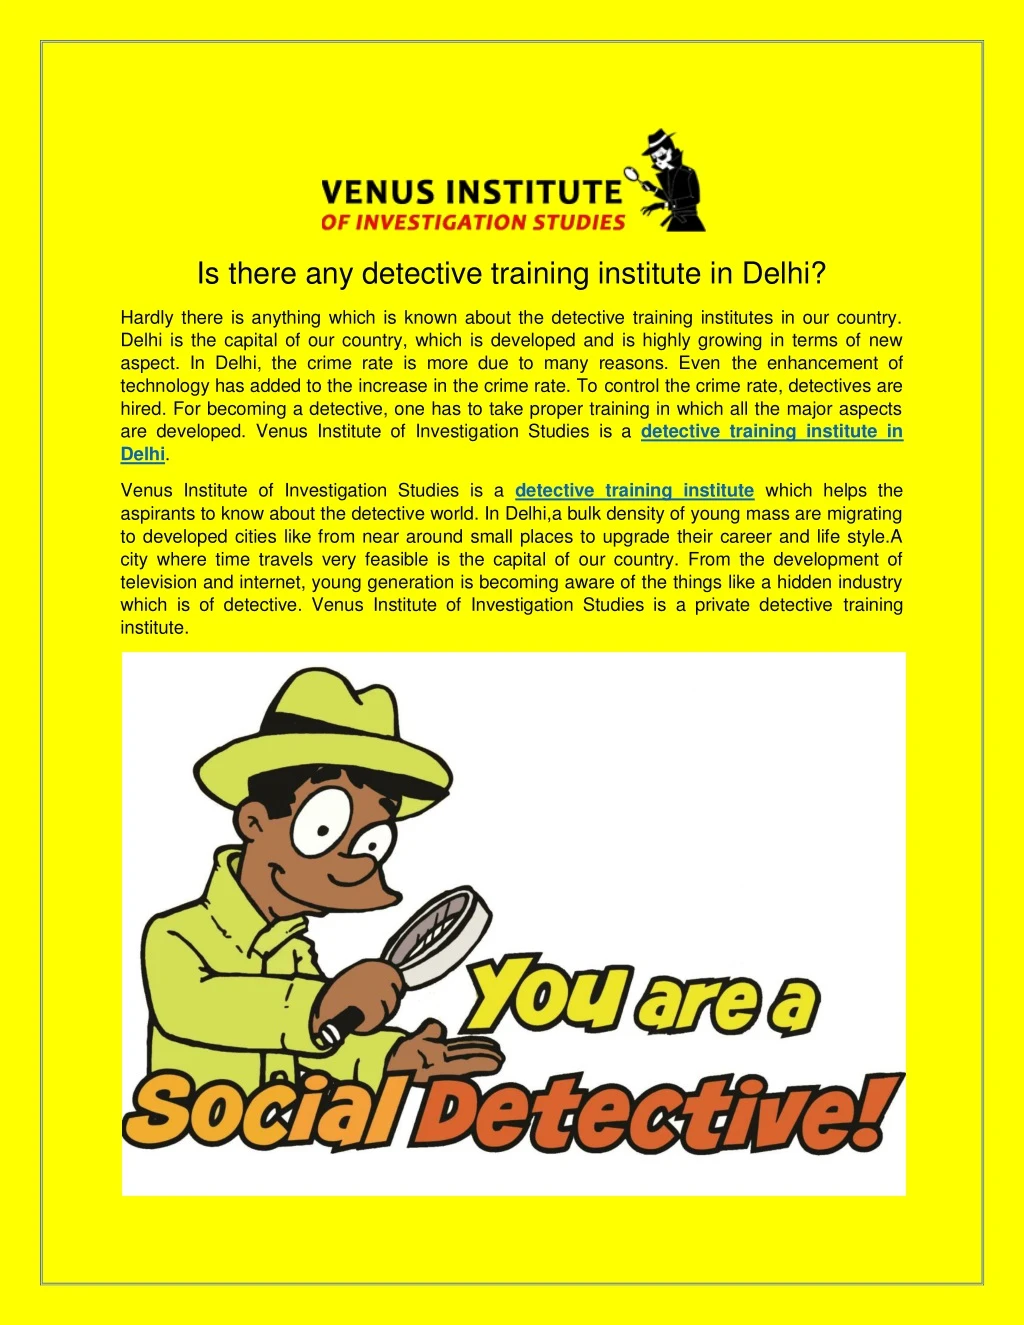 is there any detective training institute in delhi